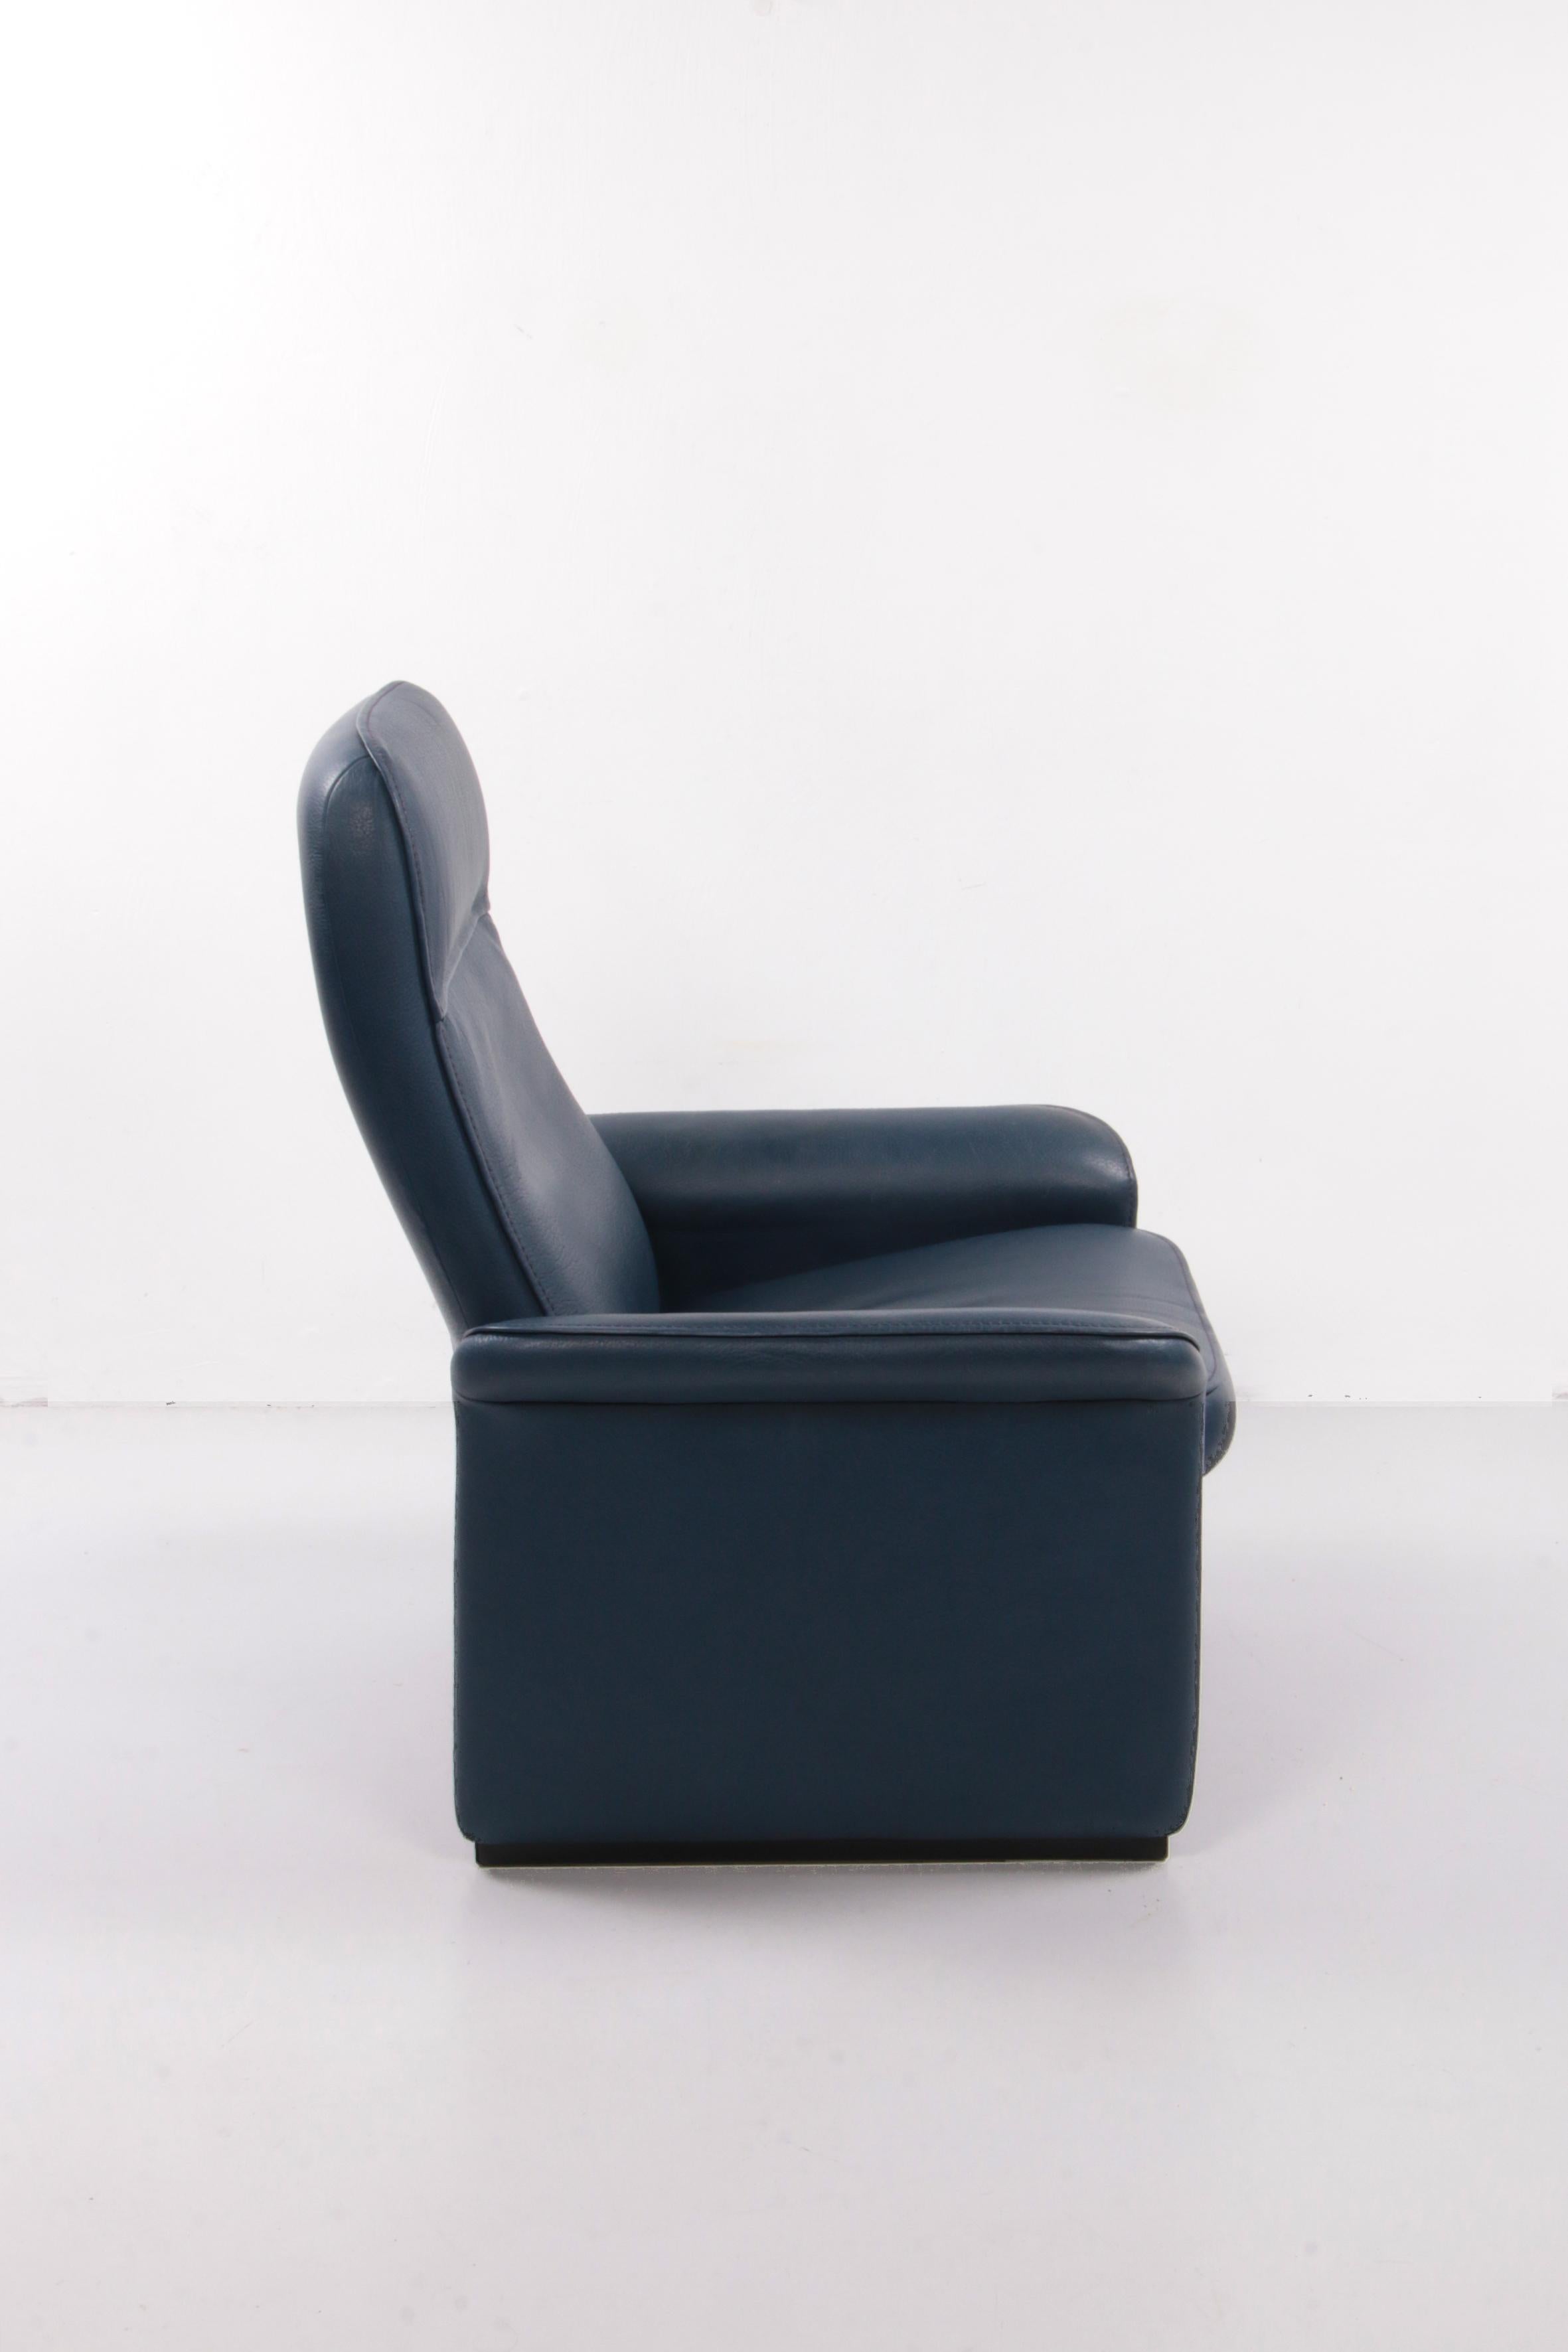 Late 20th Century De Sede Ds 50 Relax Armchair with Hocker Leather Petrol Colour, 1980 Switzerland